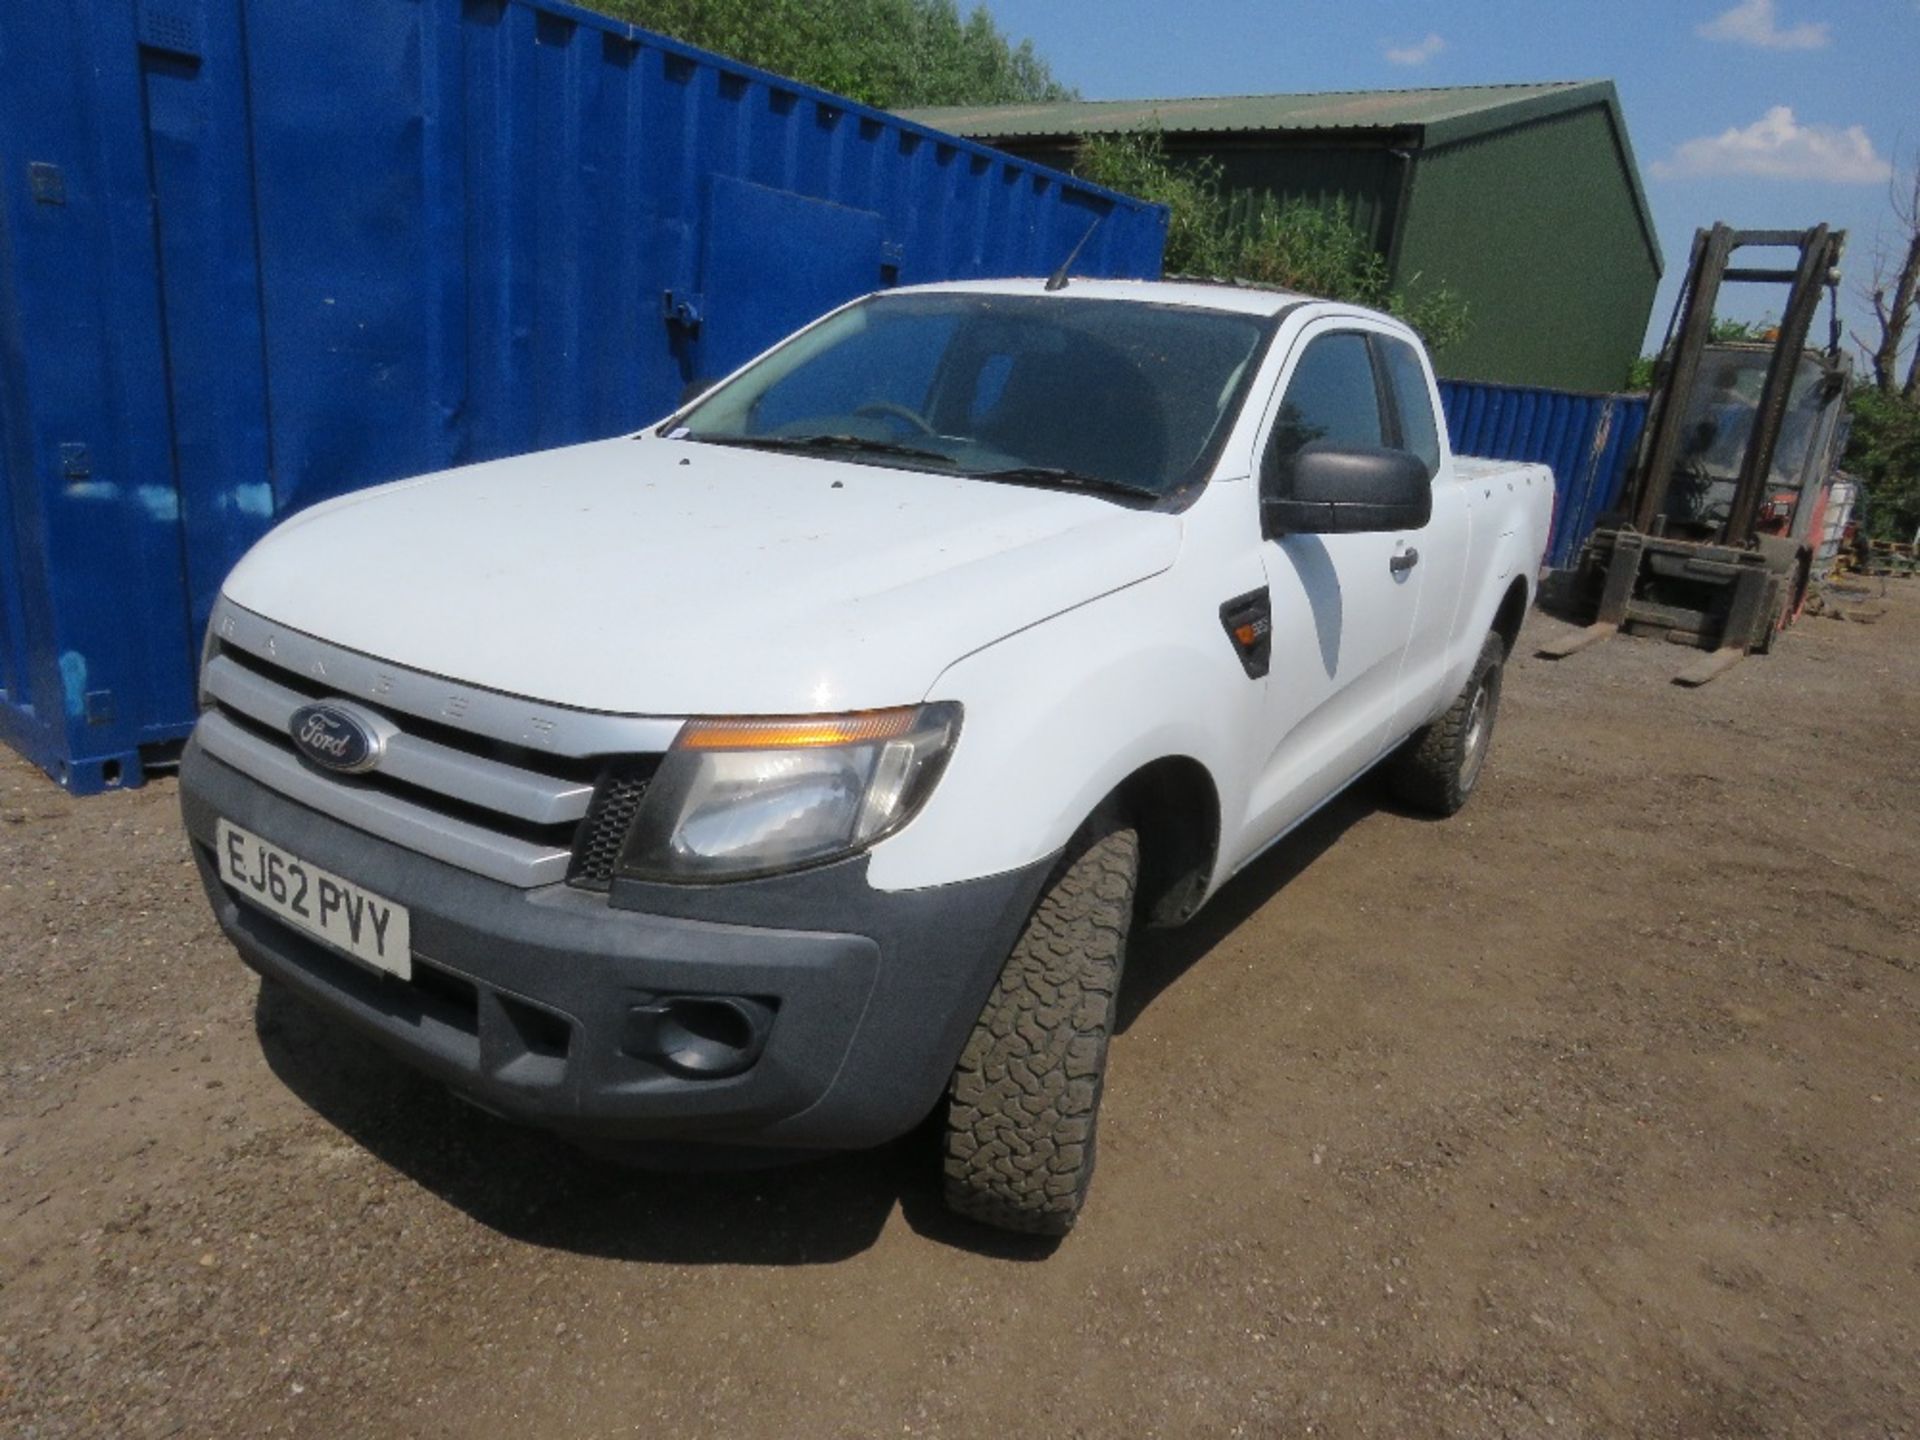 FORD RANGER SPACE CAB PICKUP TRUCK REG: EJ62 PVY. DIRECT FROM LOCAL COMPANY WITH V5. 2.2LITRE, 6 SP